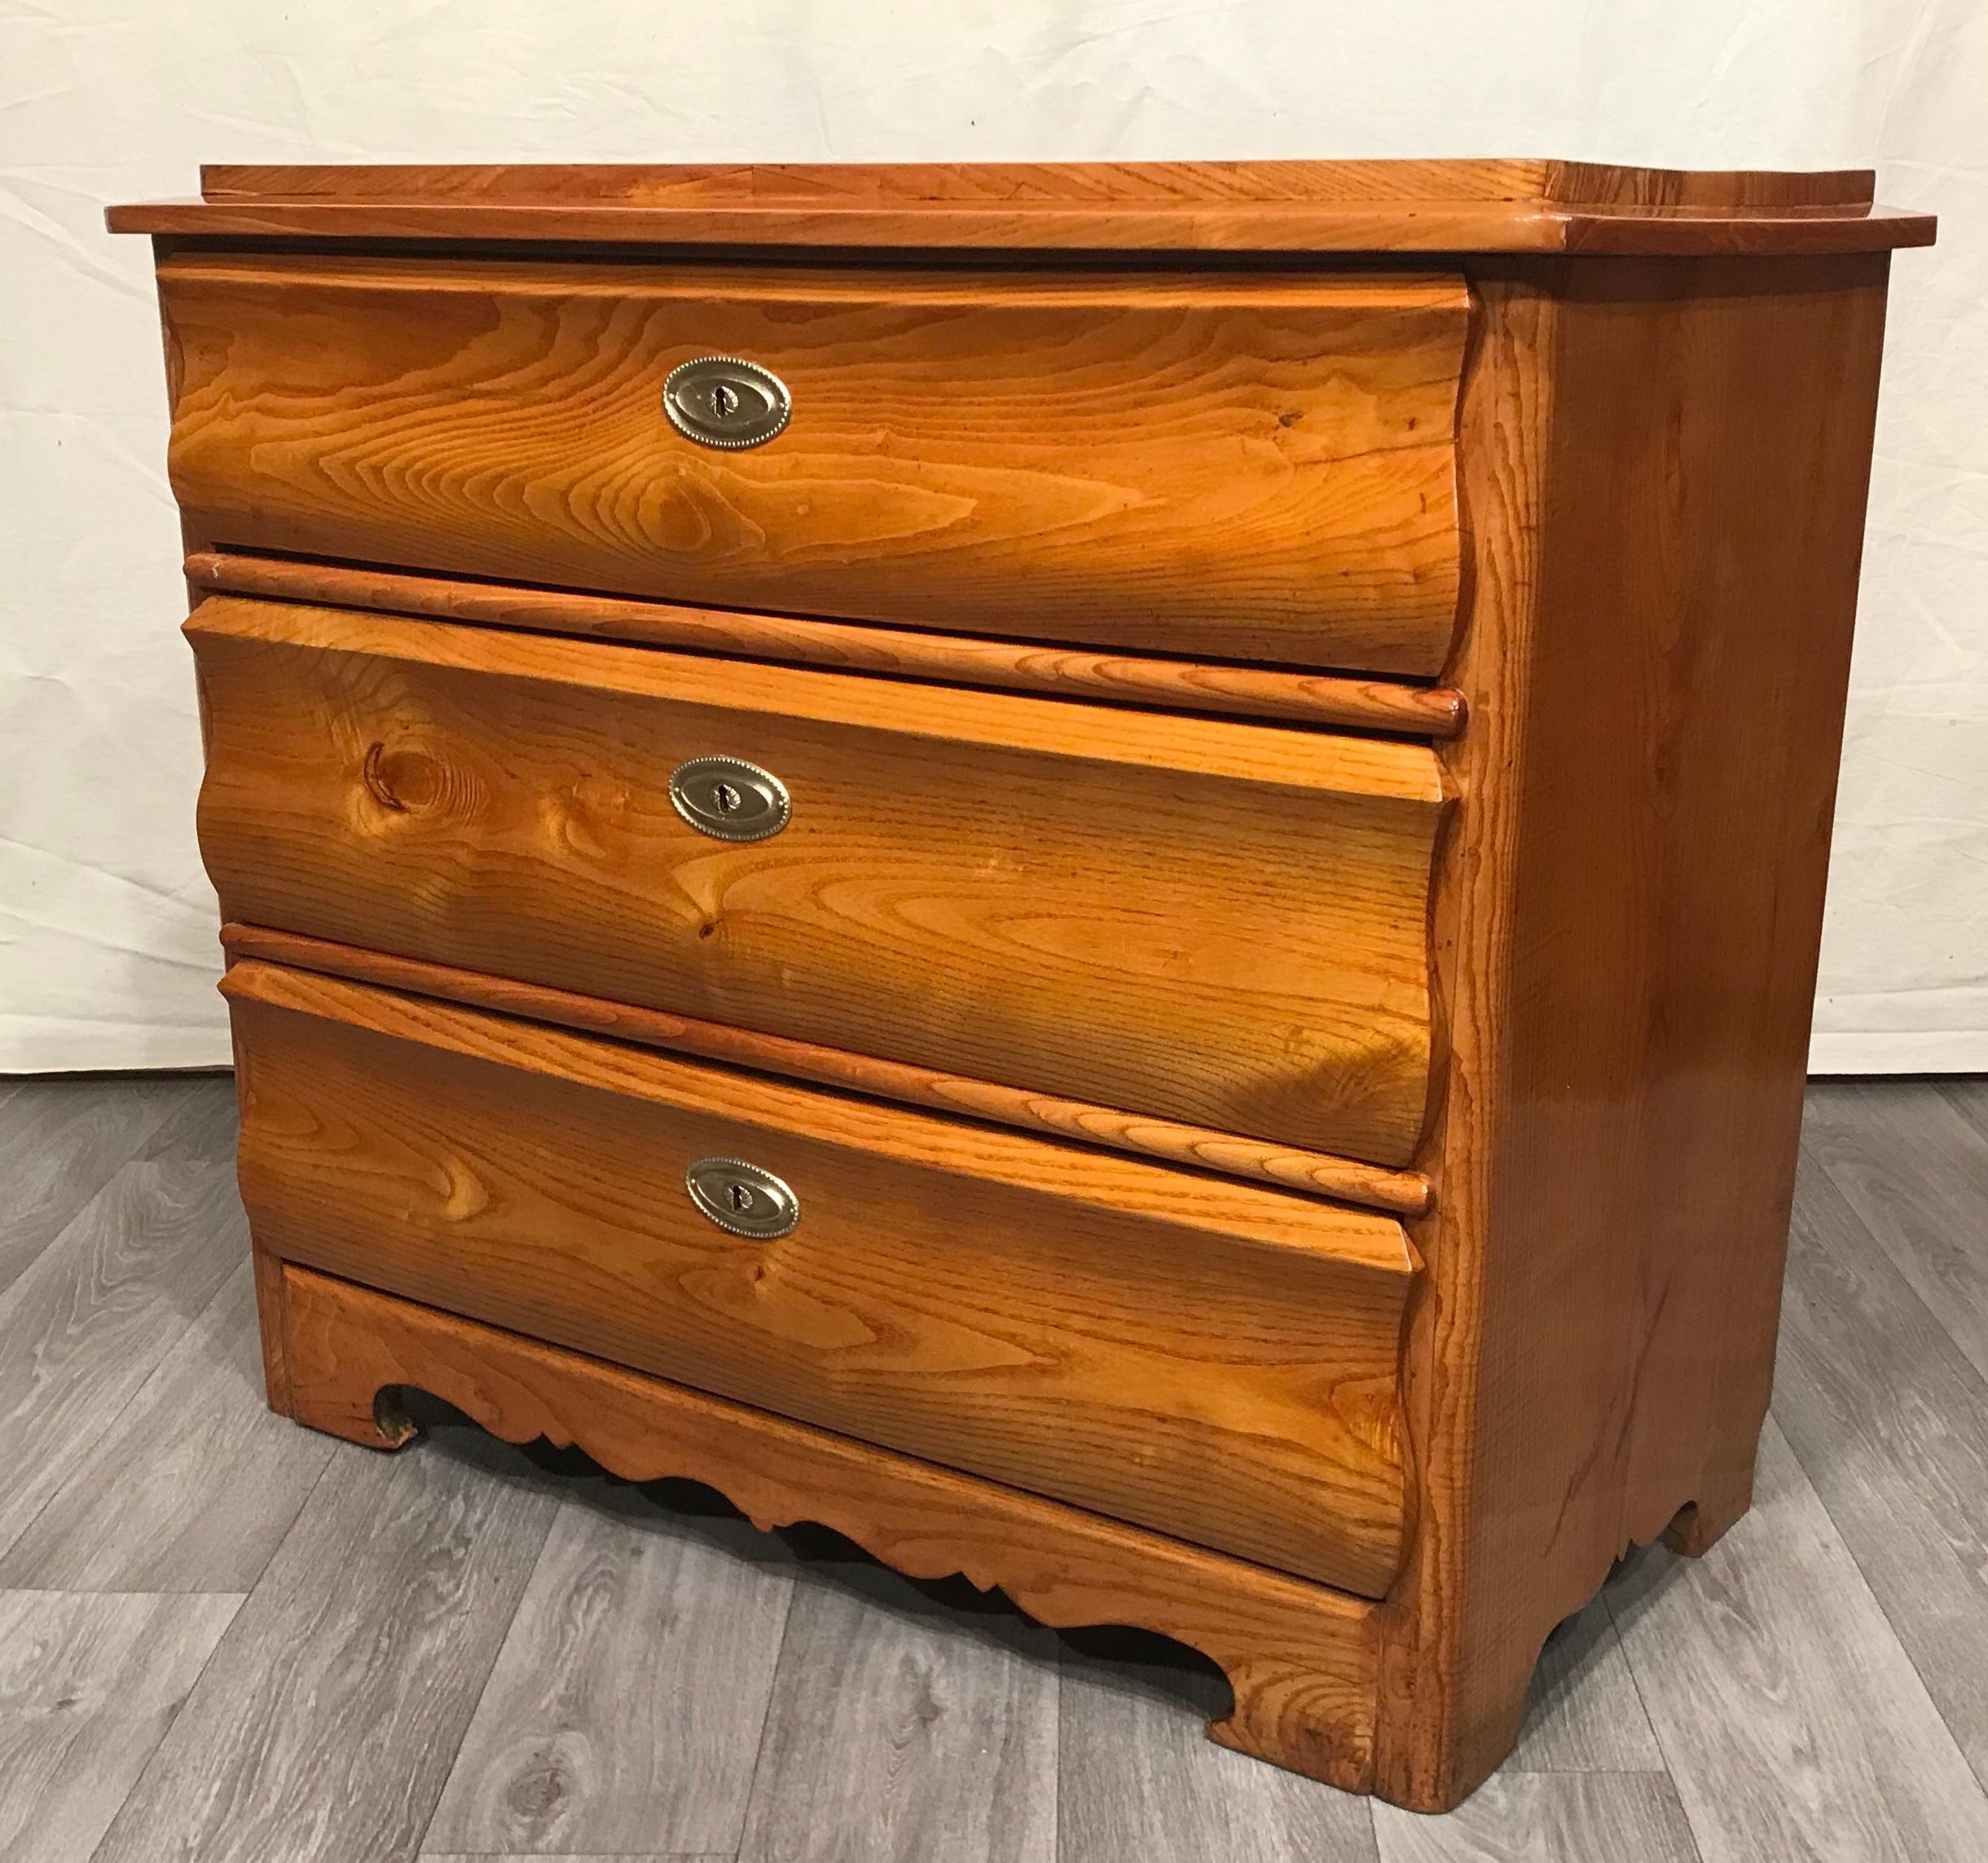 This Biedermeier chest of drawers dates back to 1840 and is an example of a chest from the late phase of the Biedermeier style. It comes from Southern Germany. The curved profile of the drawers is the special feature of this pretty chest. It is